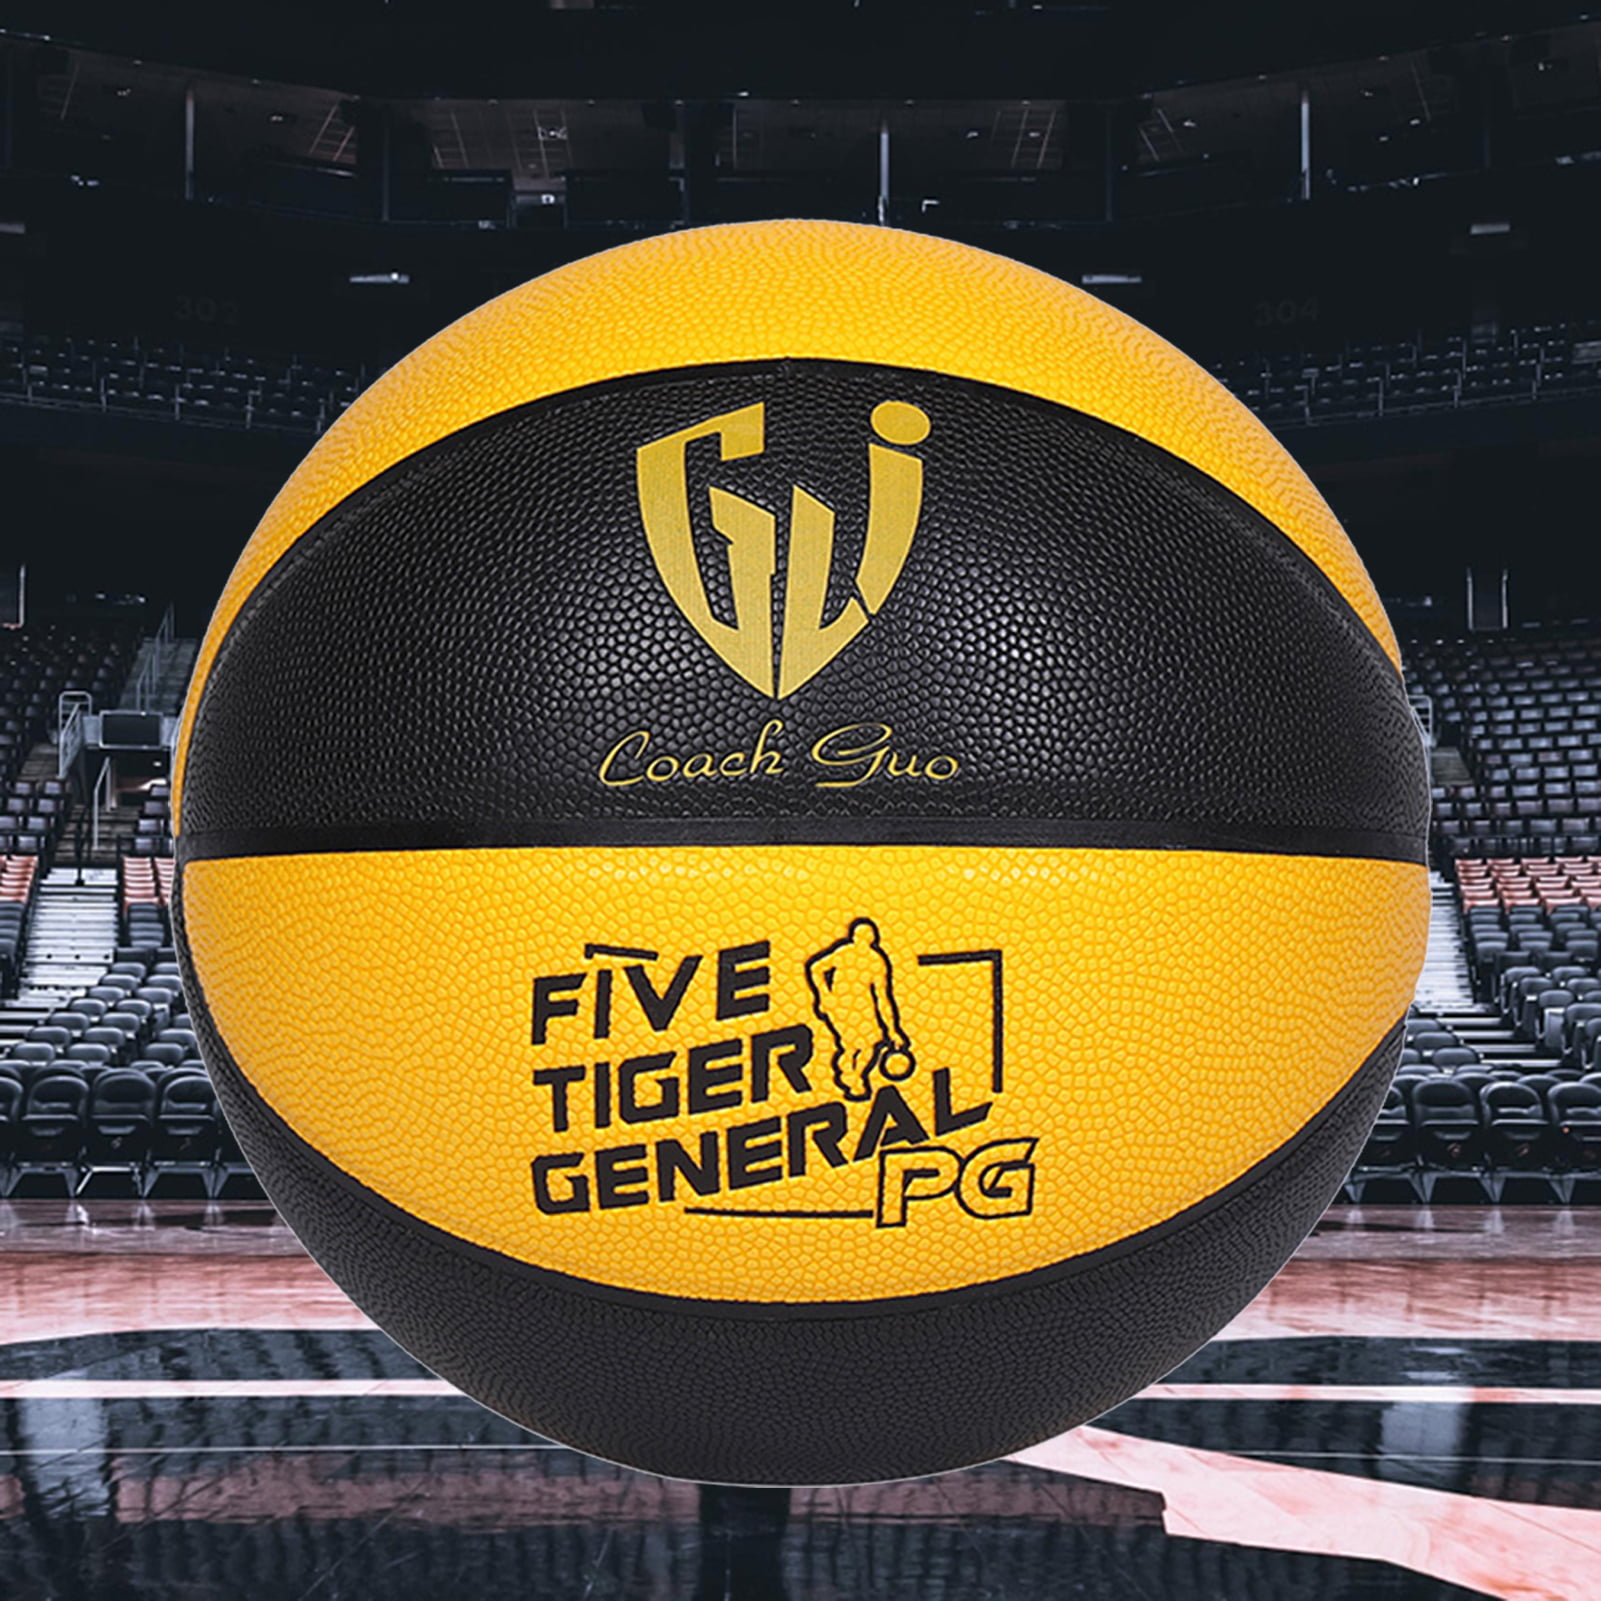 CROSSWAY Basketball Official Size 7 Premium Rubber Basketball Made for Indoor and Outdoor Basketball Games